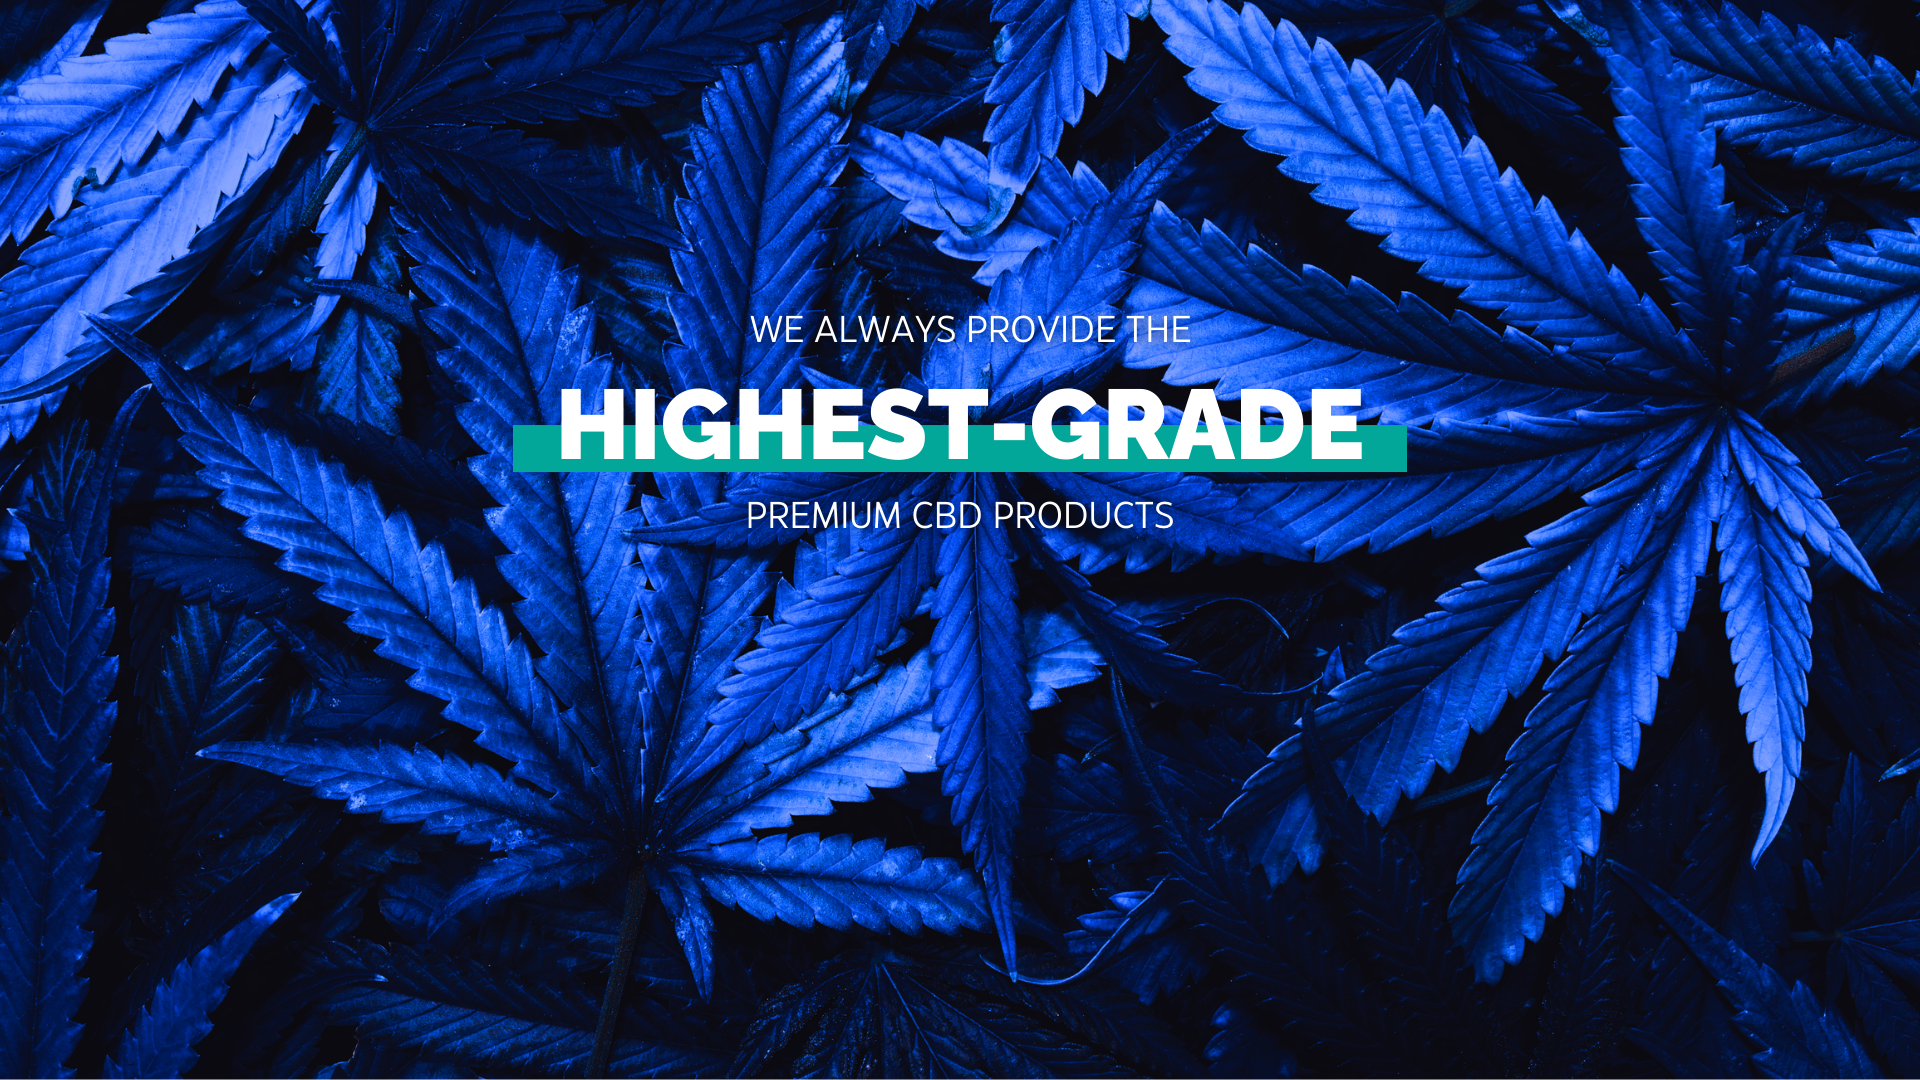 Hemp leaves with blue tint and highest grade CBD text